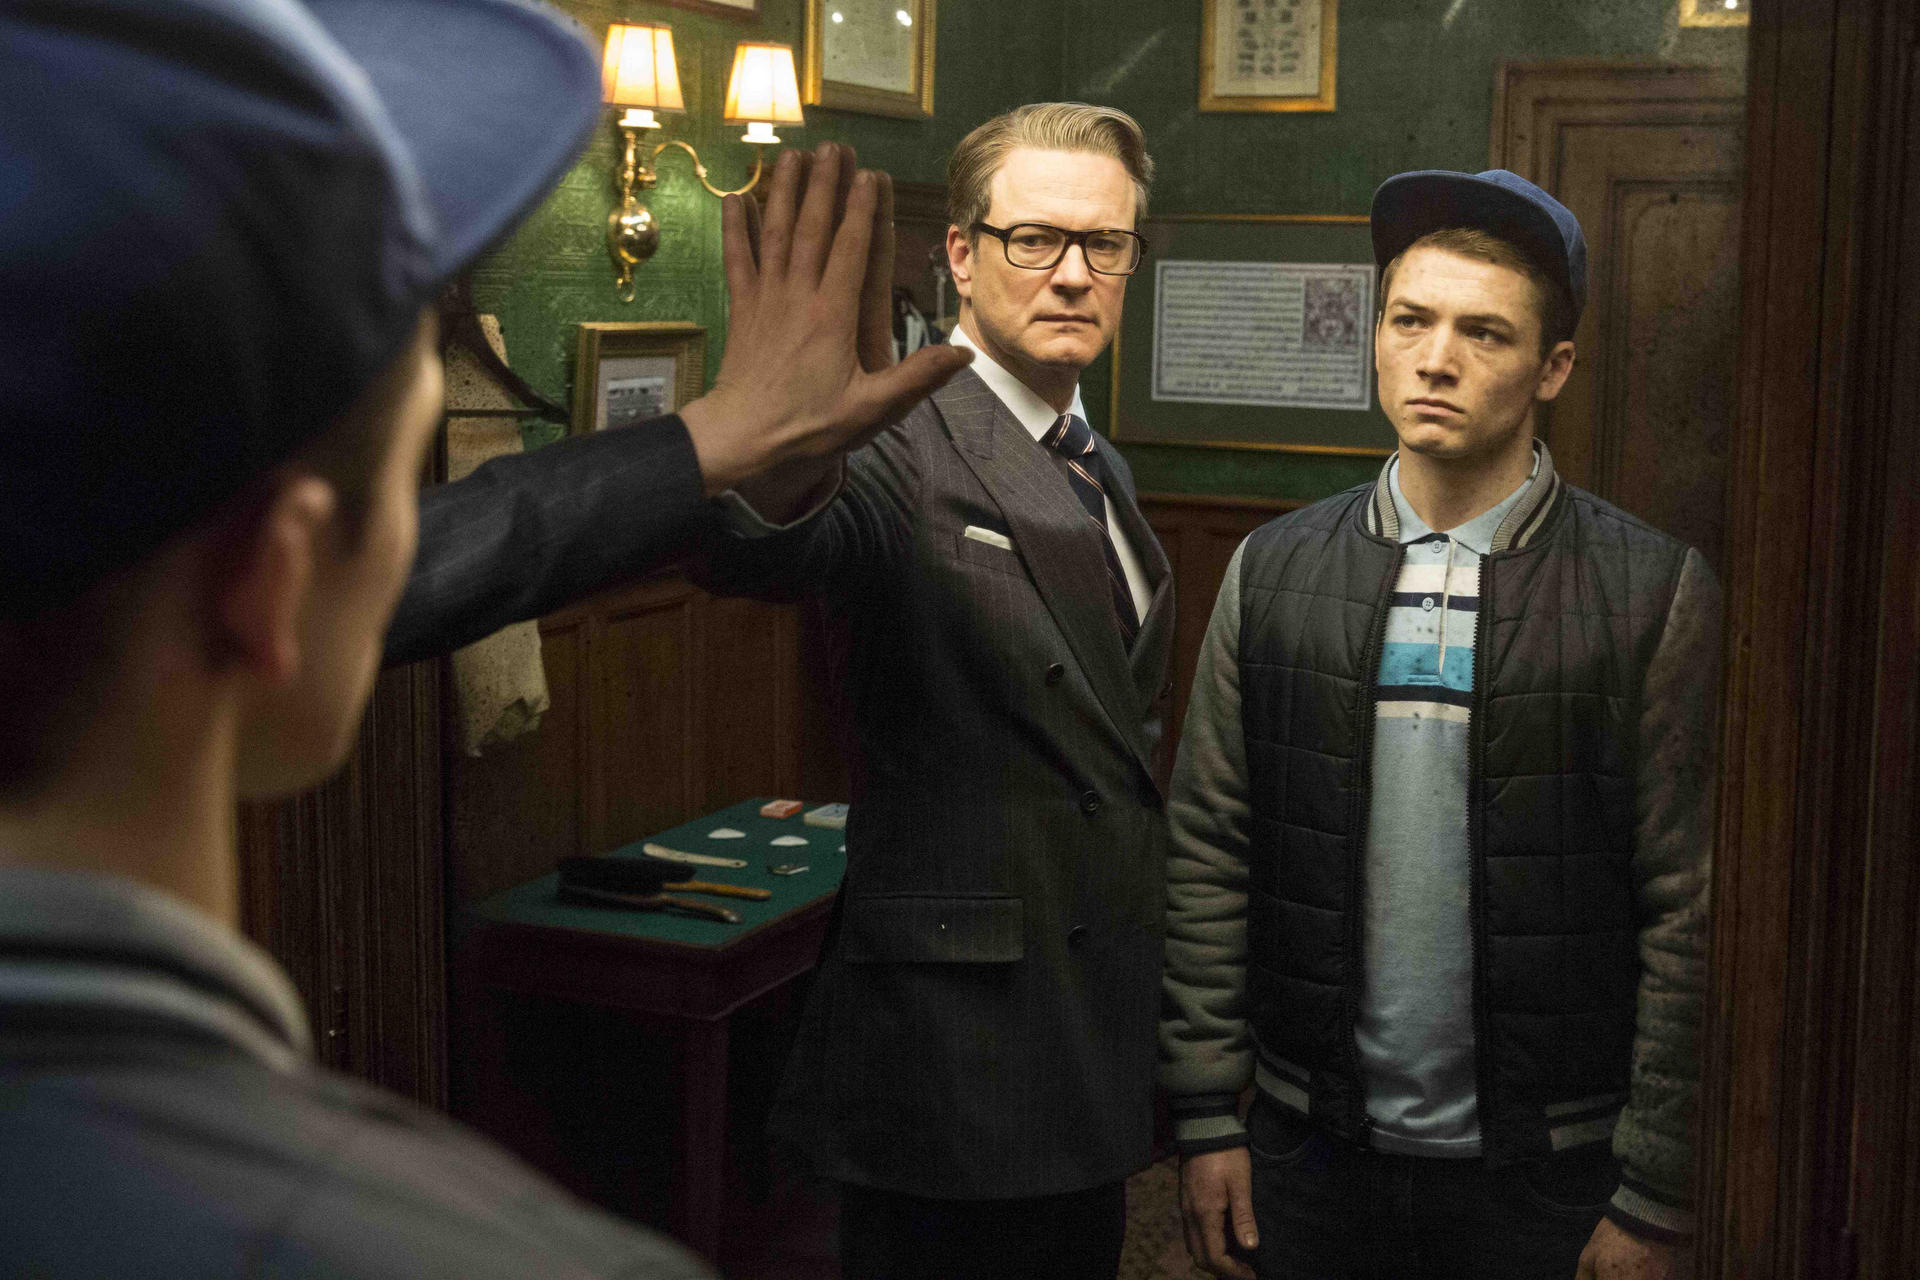 Colin Firth with Taron Egerton in a scene from Kingsman: The Secret Service.